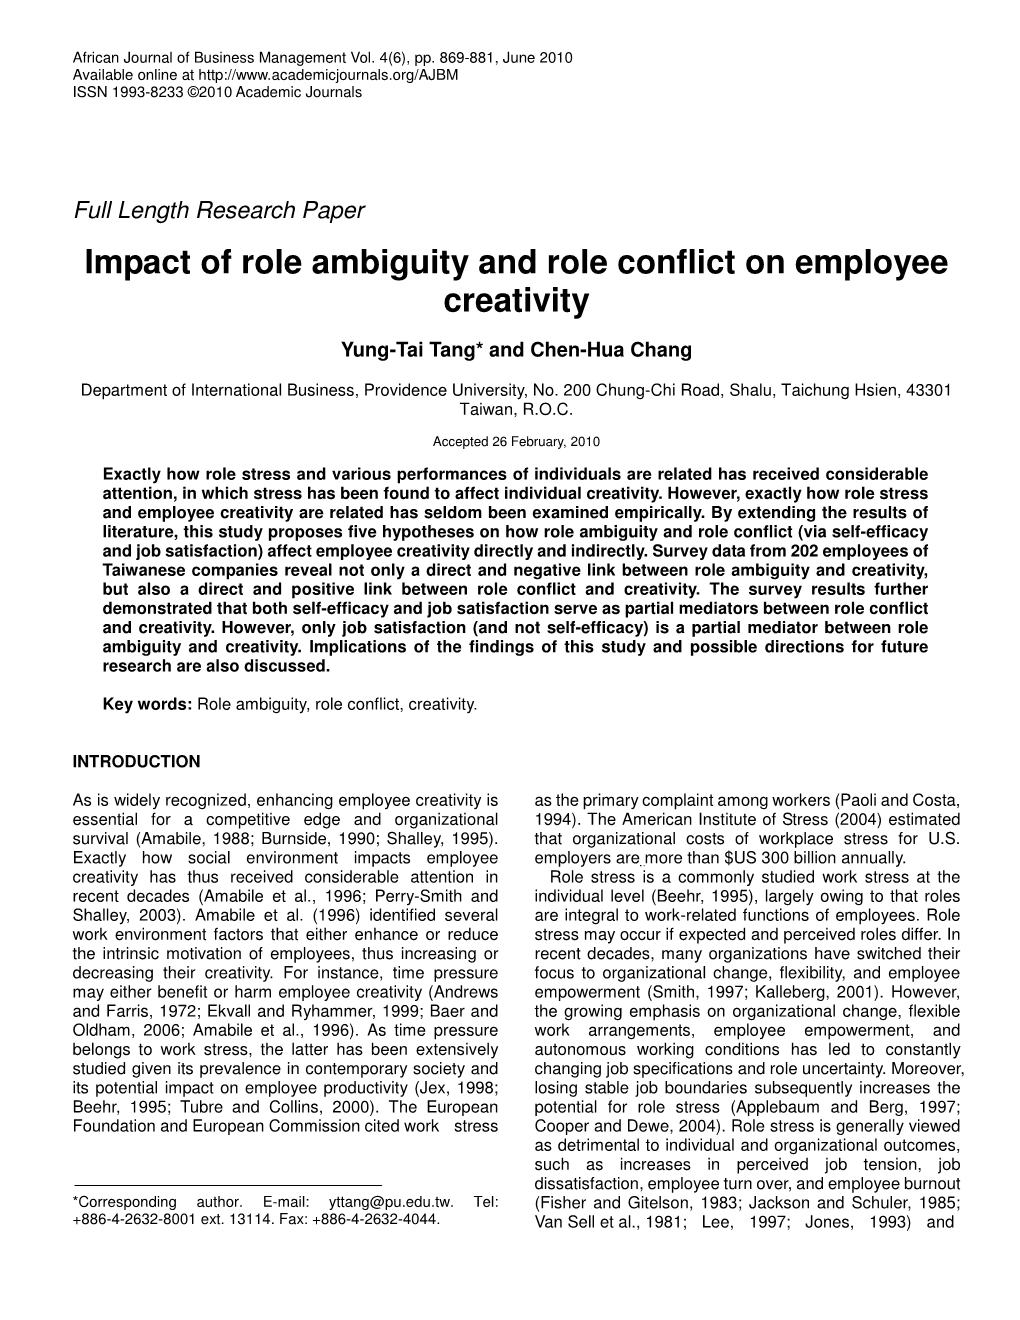 Impact of Role Ambiguity and Role Conflict on Employee Creativity